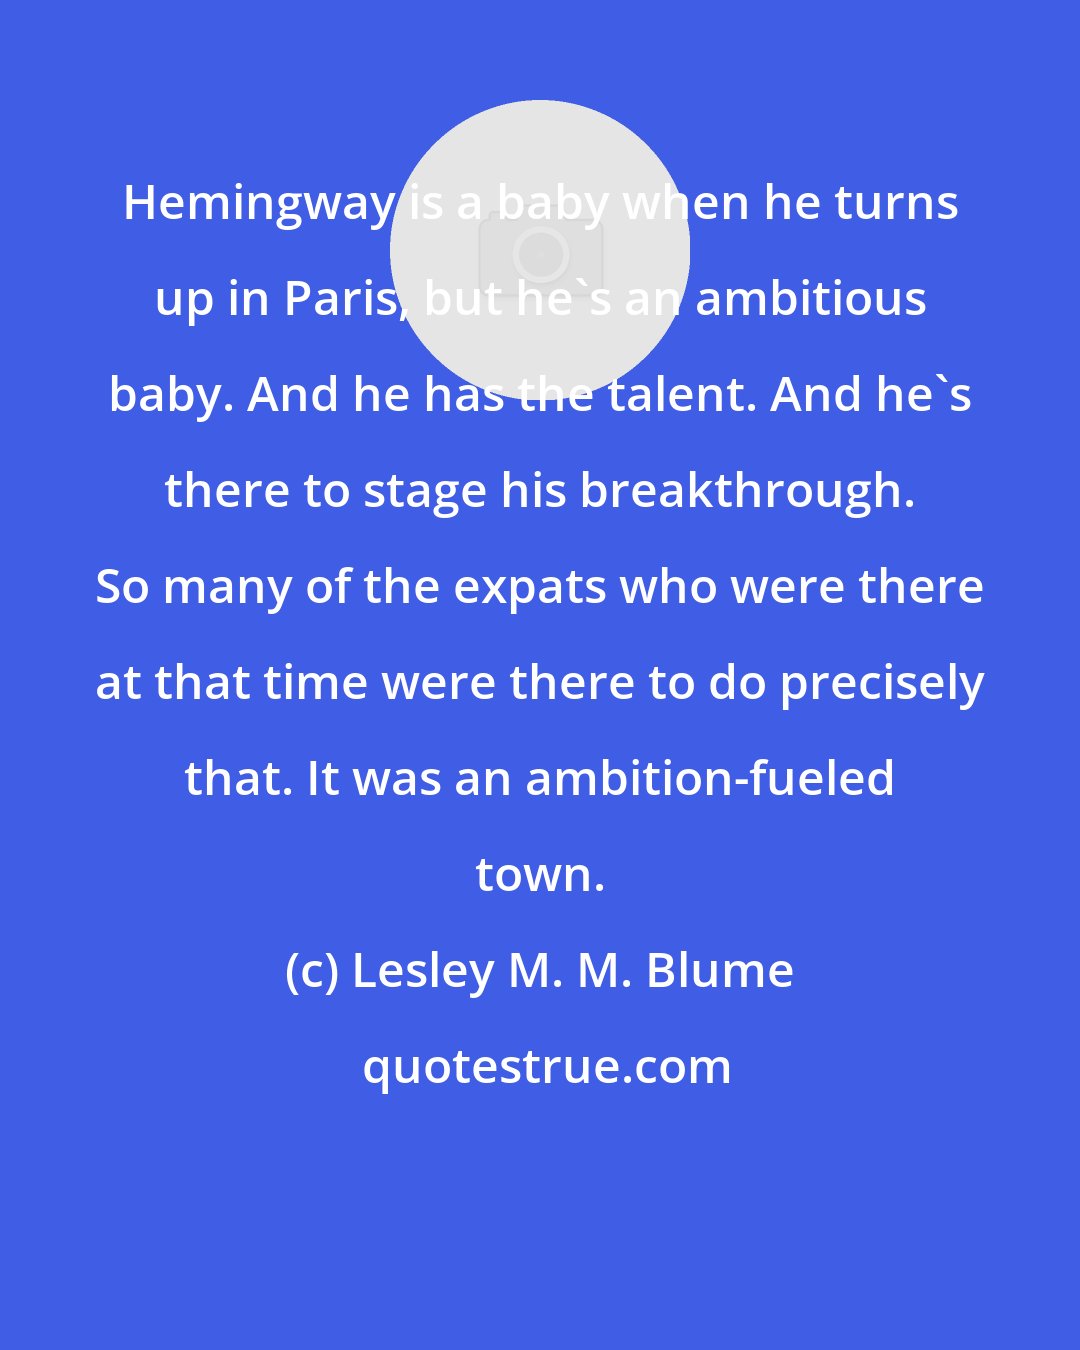 Lesley M. M. Blume: Hemingway is a baby when he turns up in Paris, but he's an ambitious baby. And he has the talent. And he's there to stage his breakthrough. So many of the expats who were there at that time were there to do precisely that. It was an ambition-fueled town.